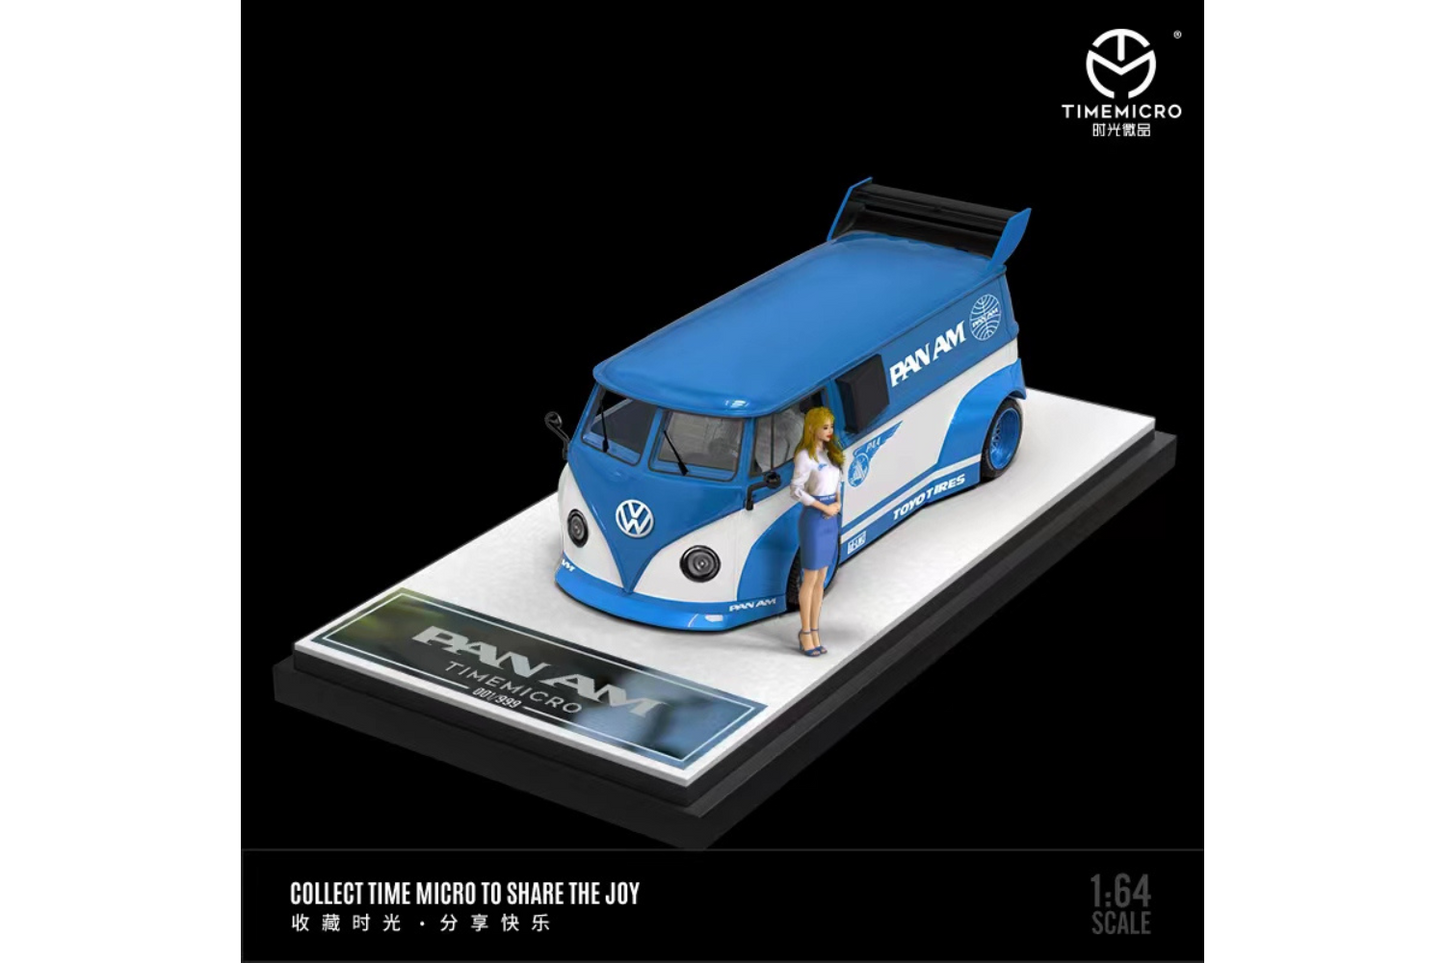 Time Micro 1/64 Volkswagen T1 Bus in Pan Am Blue Livery